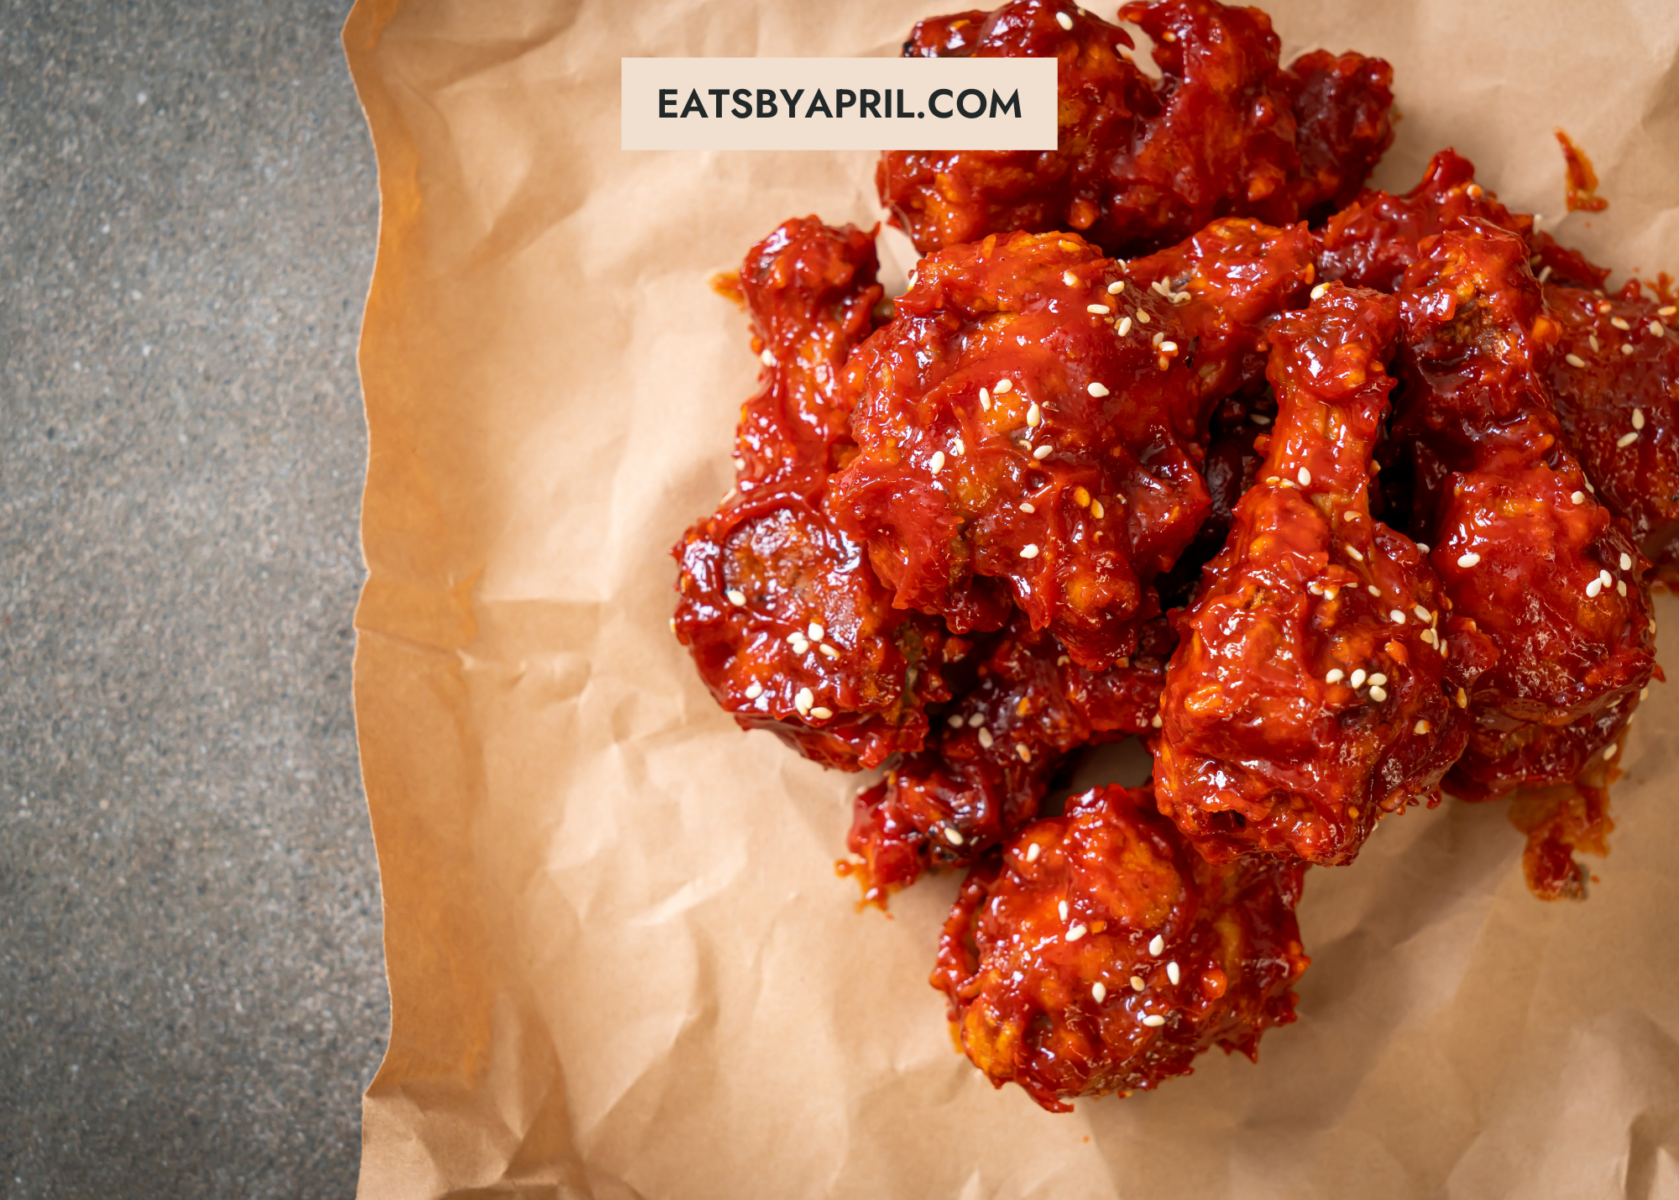 Hot wings on parchment paper.